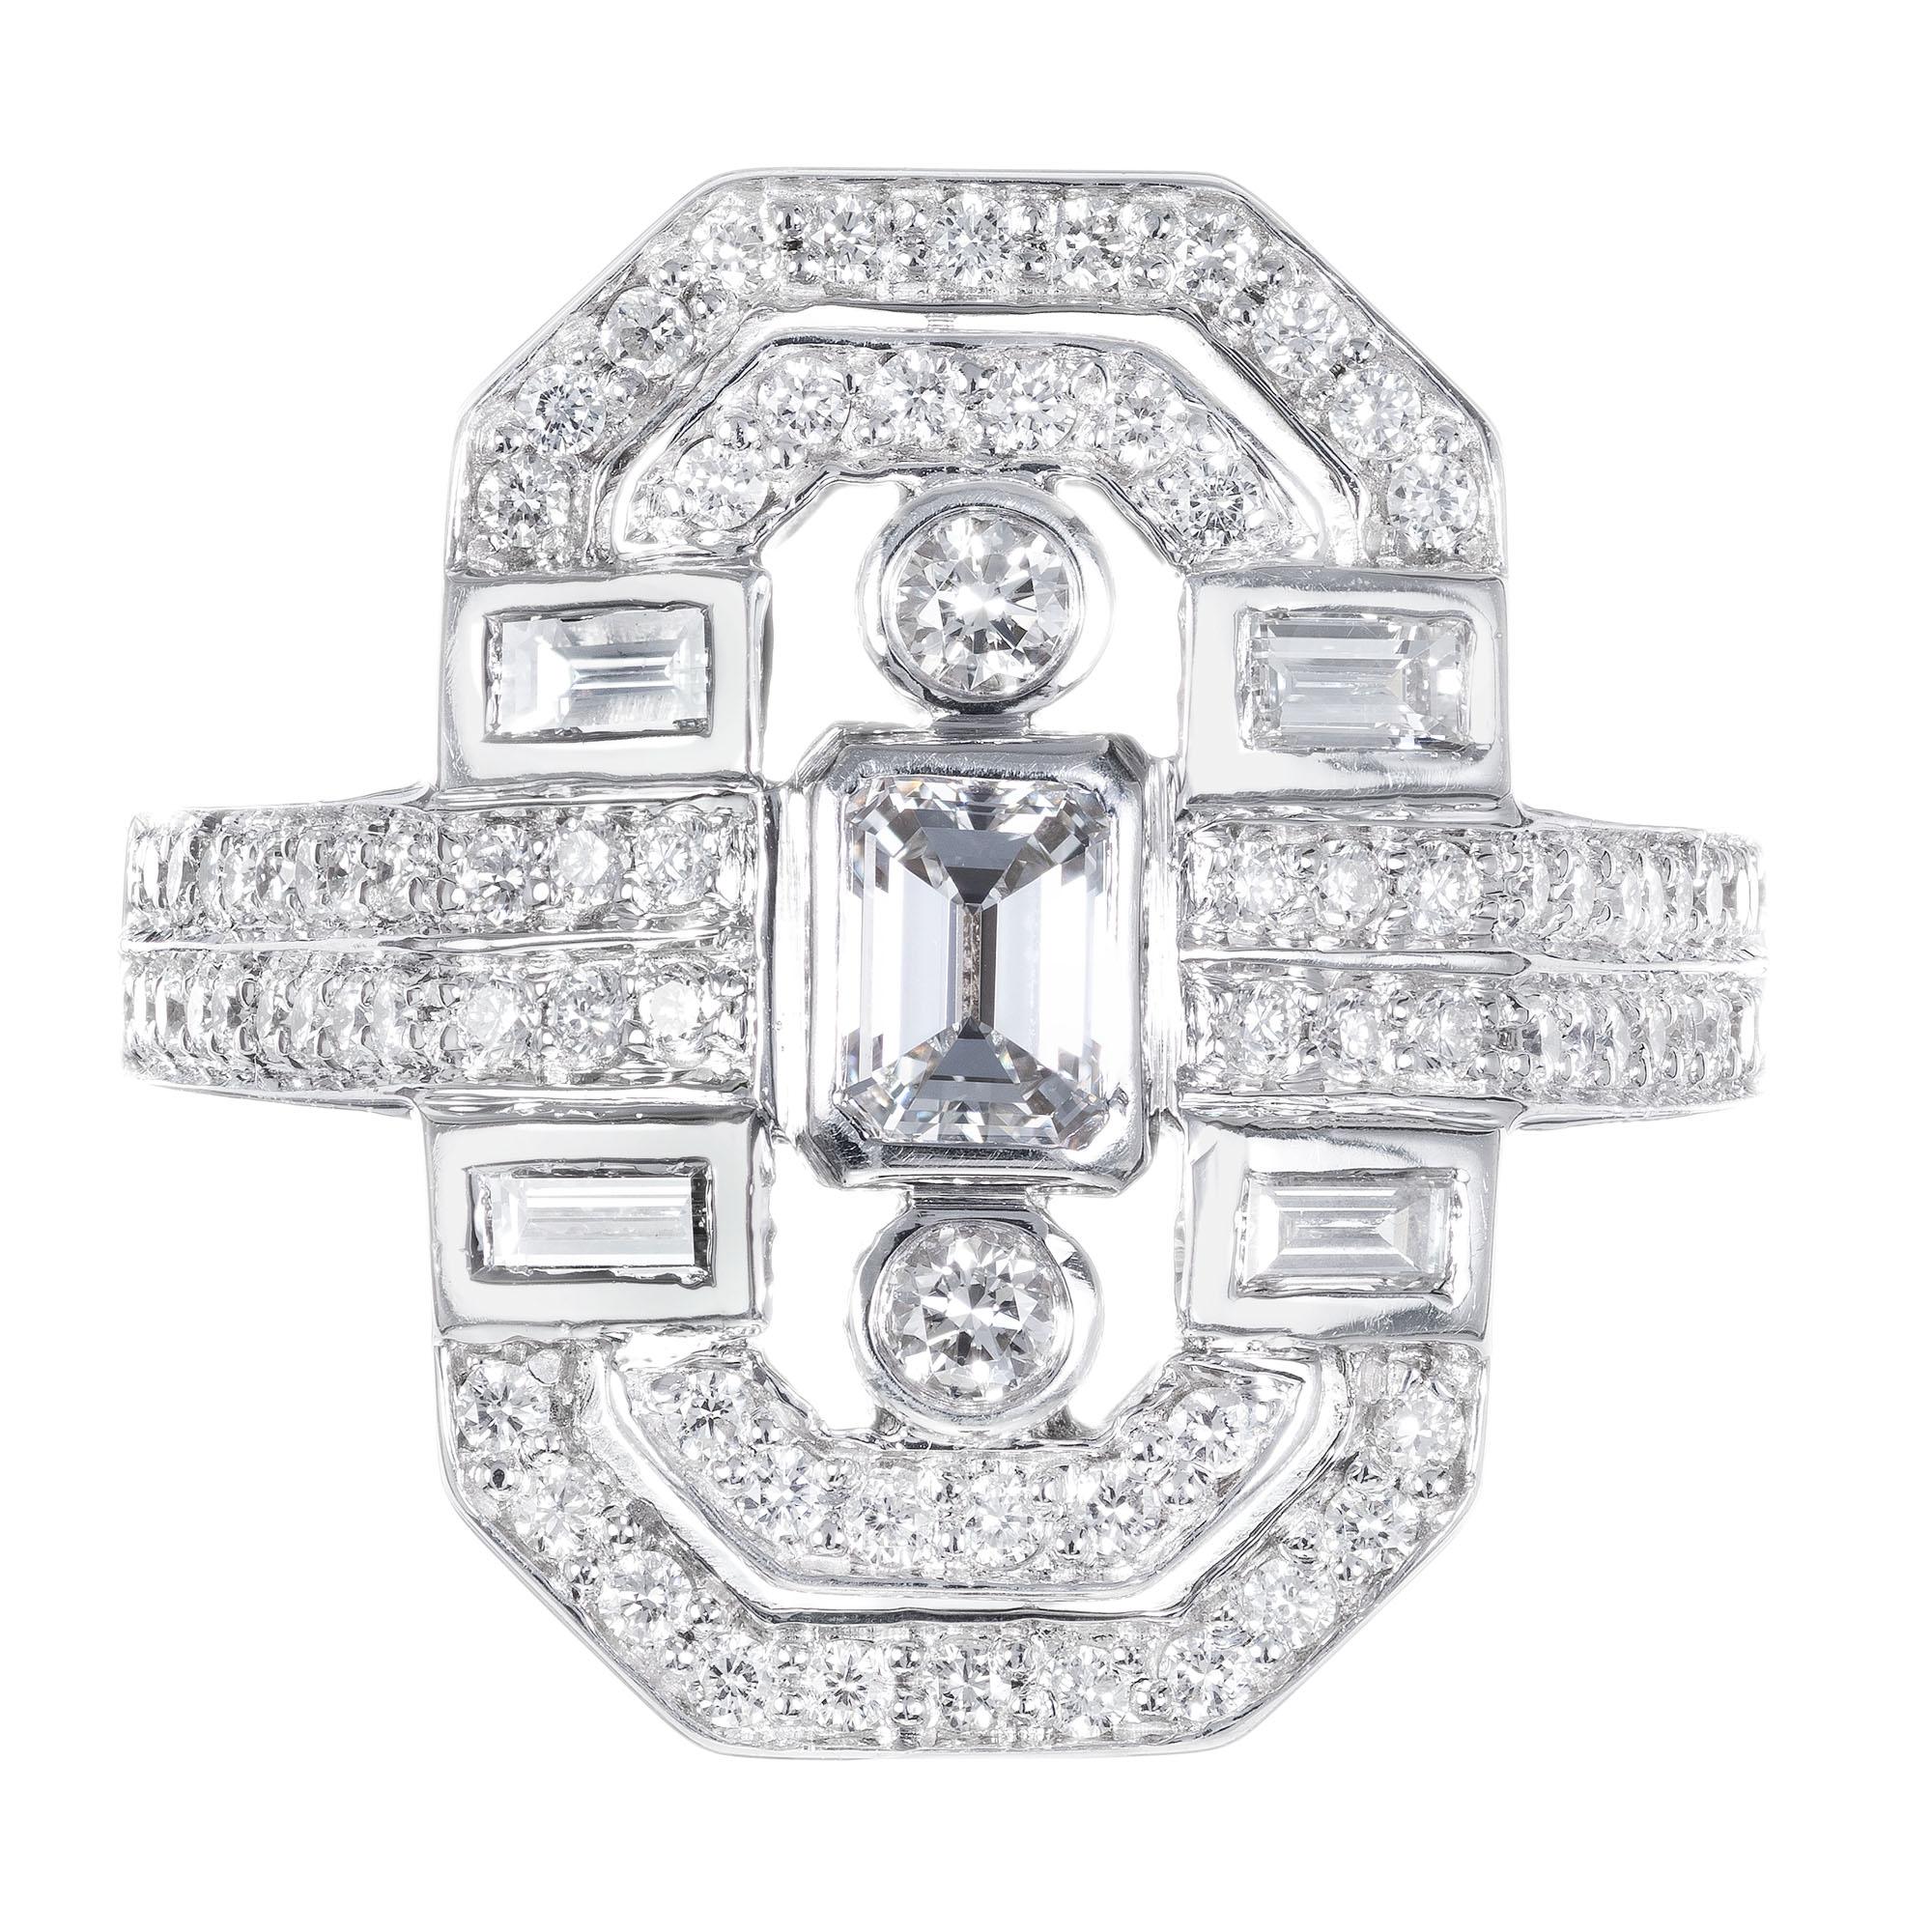  Kwiat Diamond open work ring. 18k white gold Art Deco style setting with emerald, baguette and round cut diamonds. 

1 cut corner emerald cut diamond, G VS approx. .30cts
4 straight cut baguette diamonds, G-H VS approx. .24cts
84 round brilliant